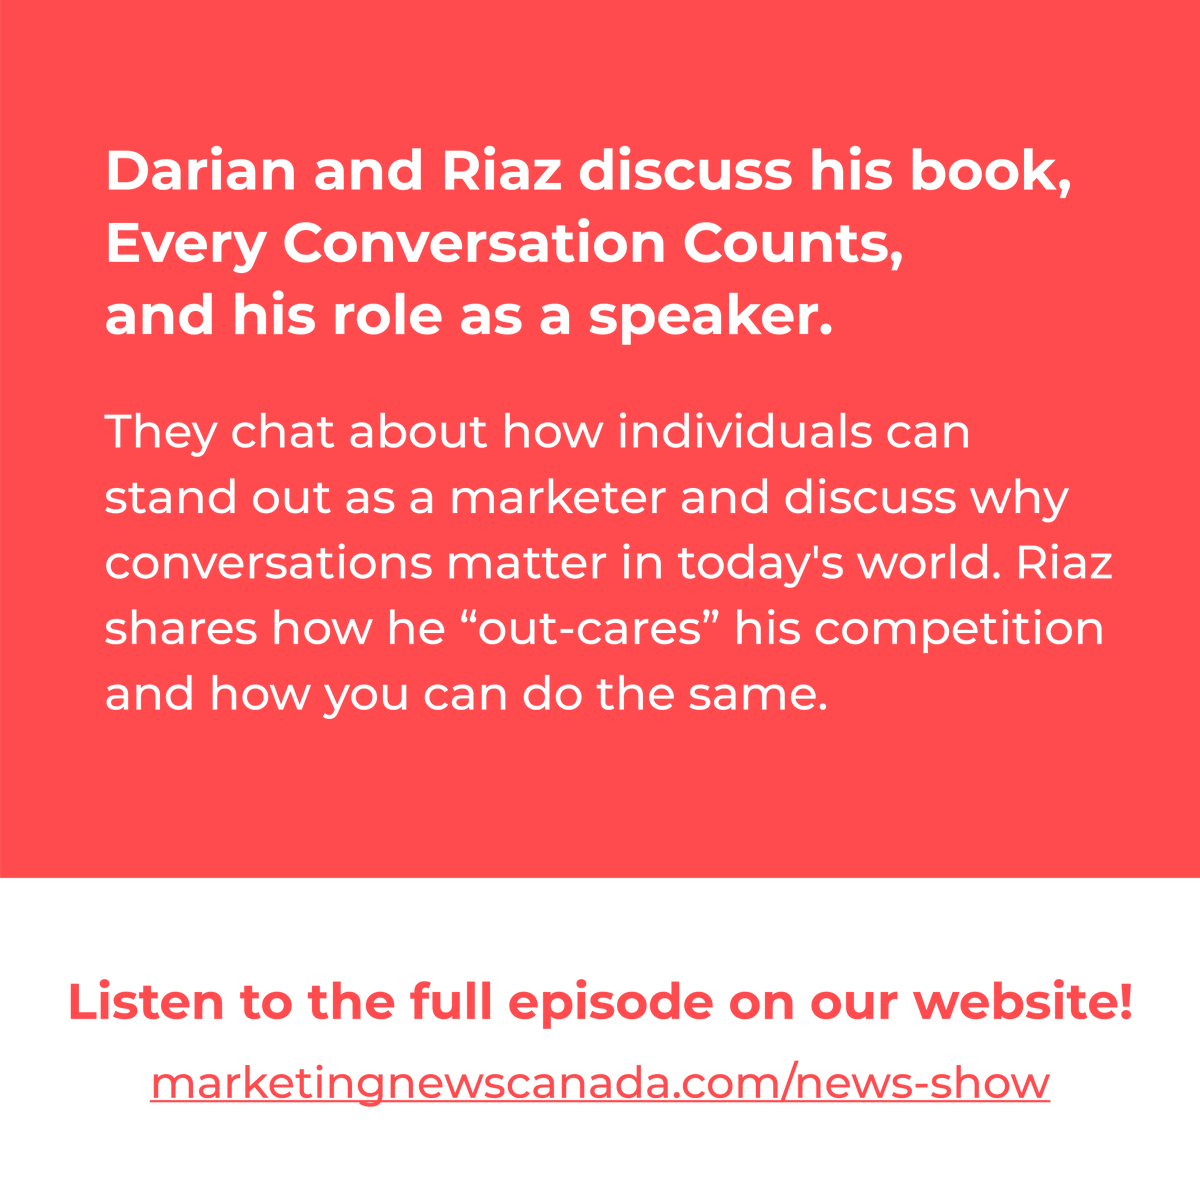 Previously on Marketing News Canada, @dariankovacs interviewed @RiazMeghji, human connection speaker, moderator, and author! Darian and Riaz discussed his book, Every Conversation Counts, and his role as a speaker. Hear more about Riaz: ow.ly/9Gf350MetBh